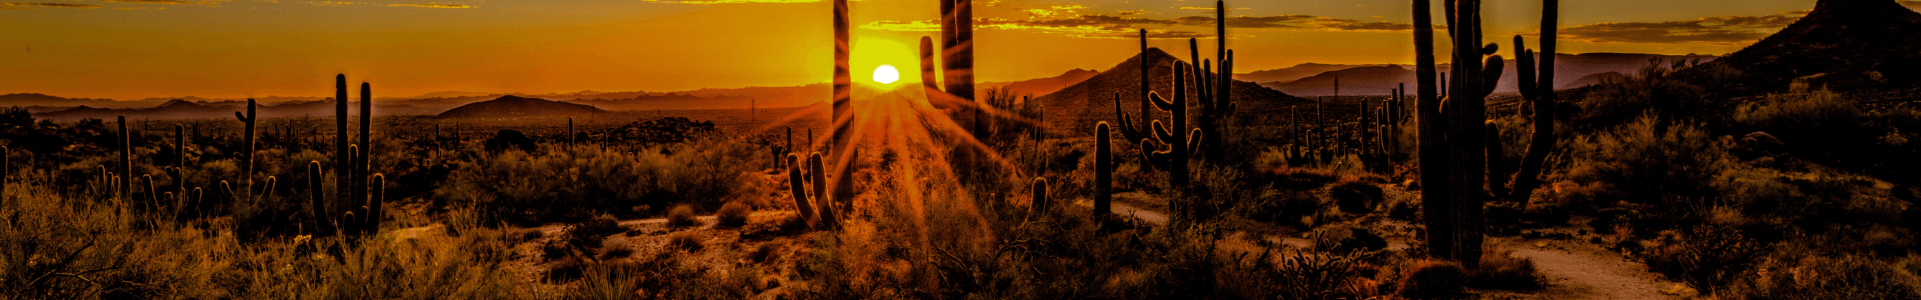 Stock Image of Sunset Behind Cacti and Bushes Shadows